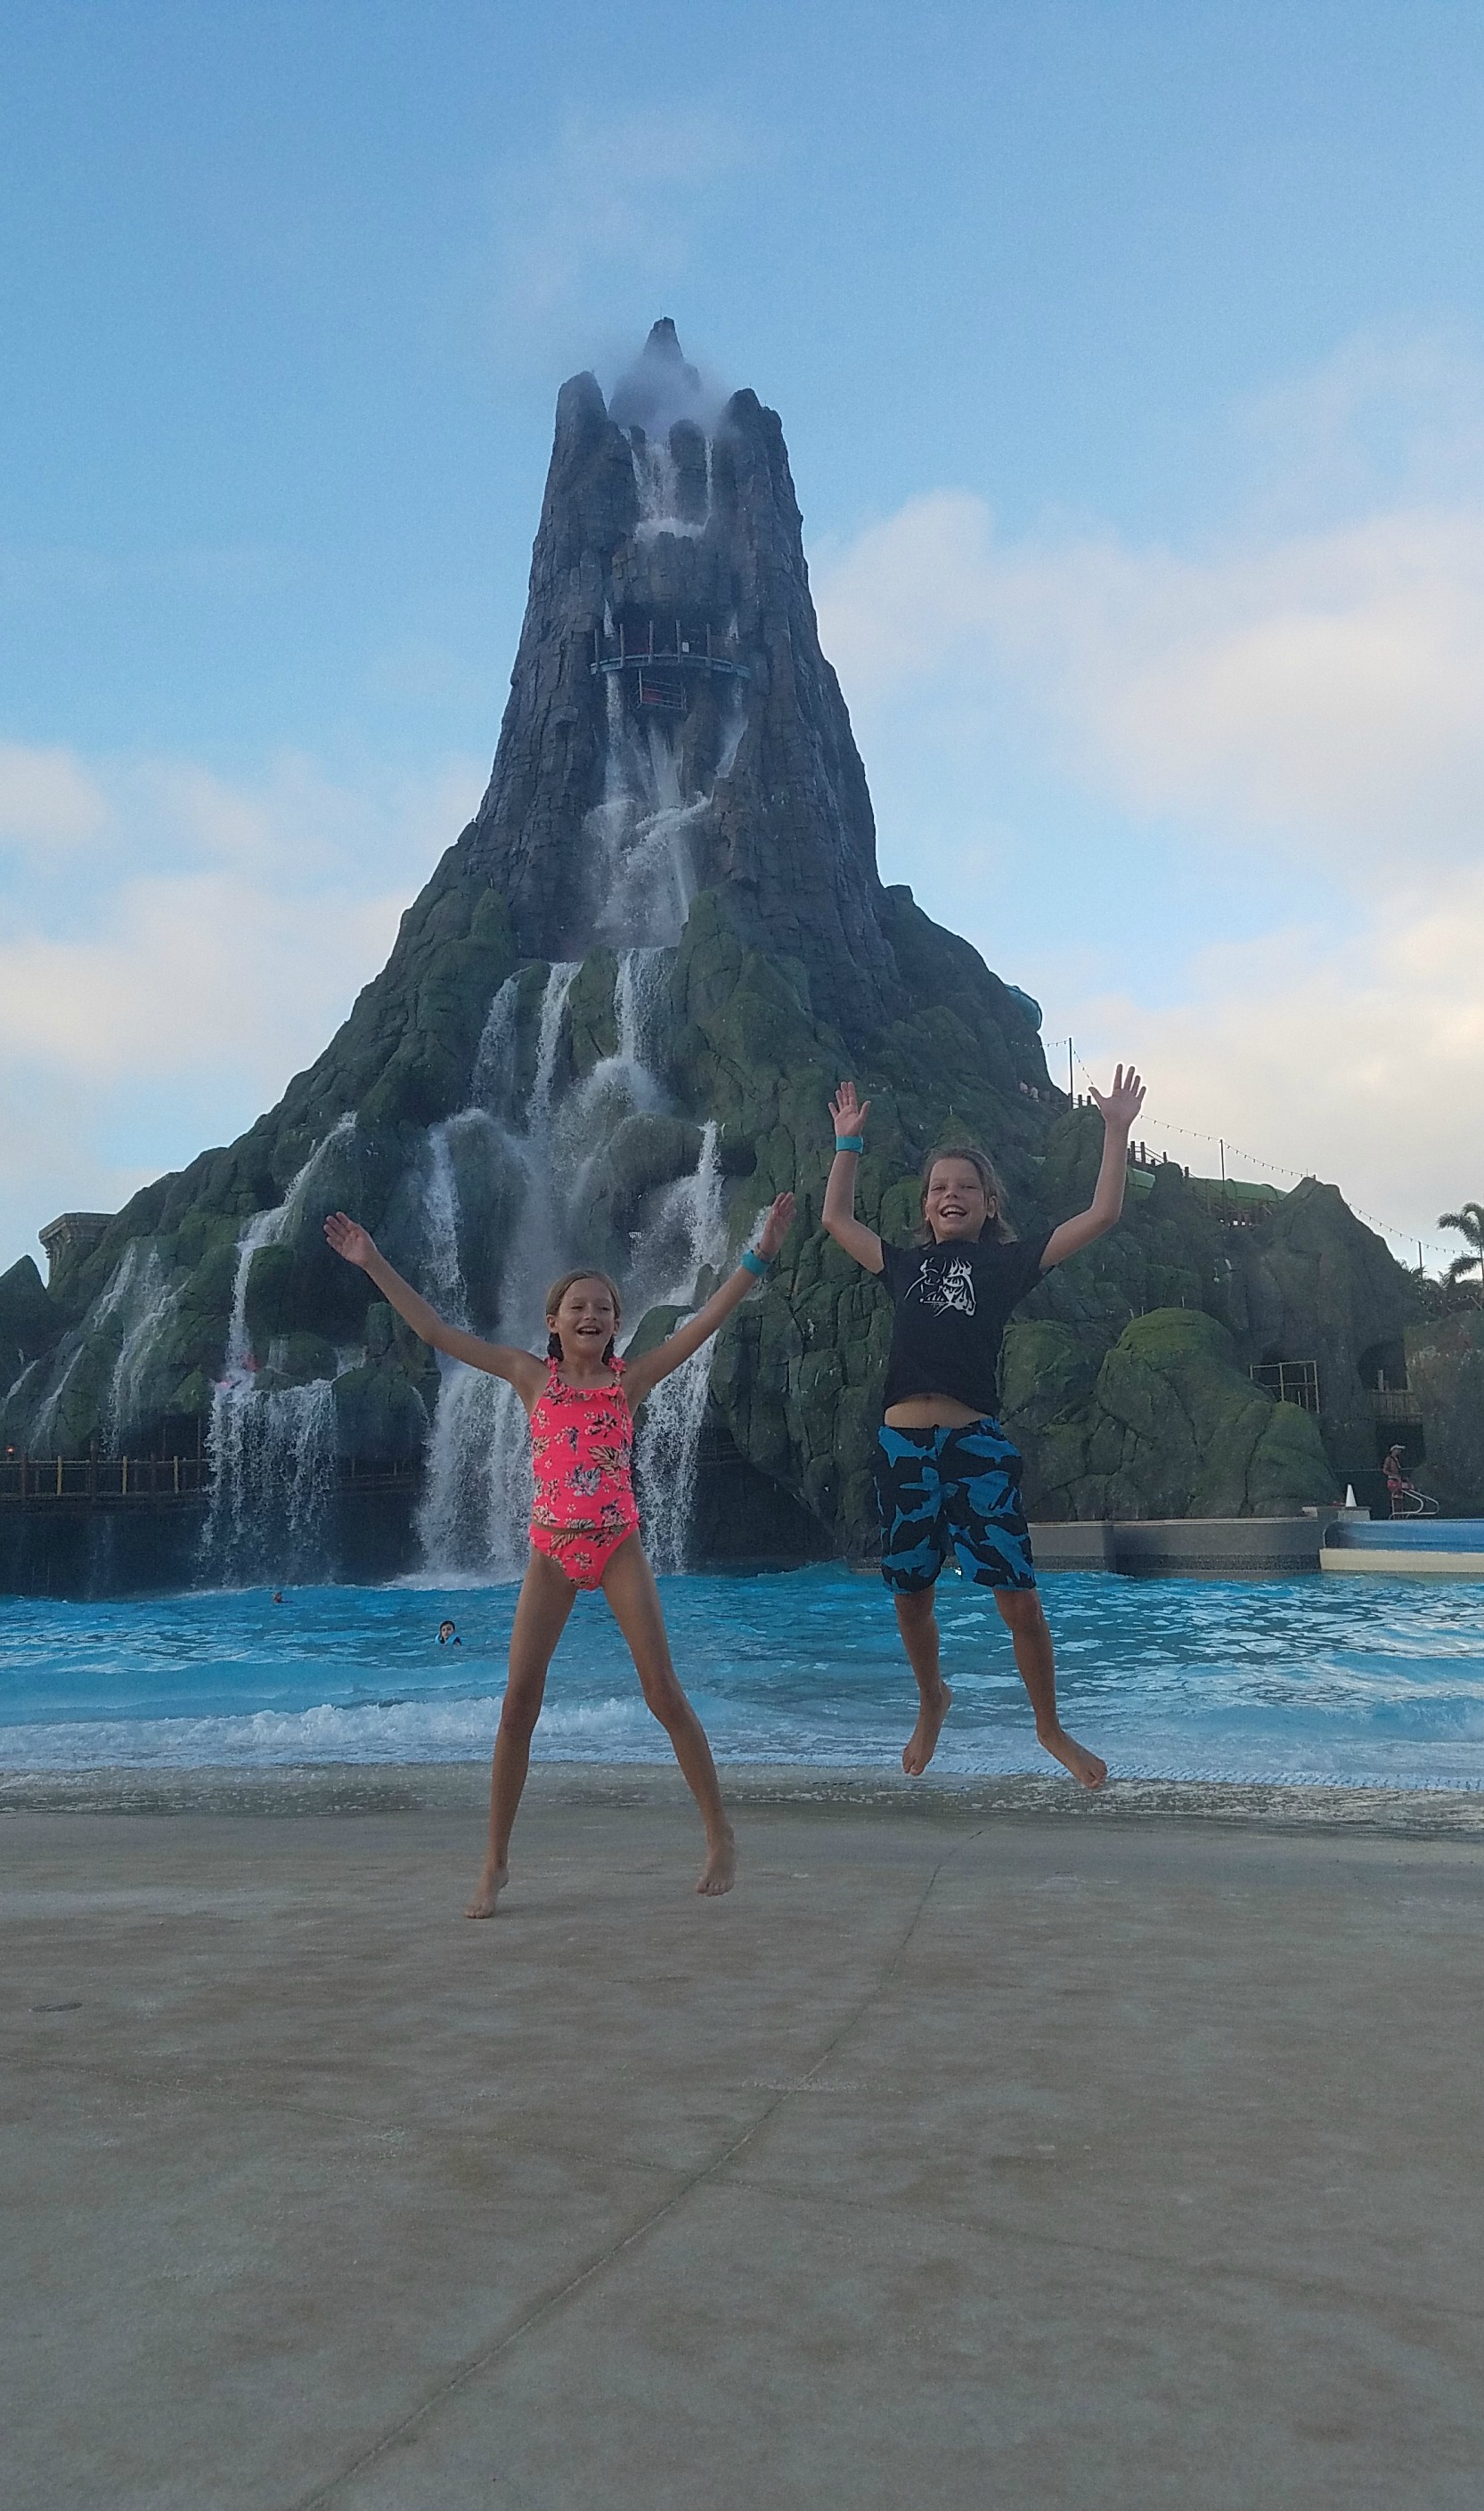 How to get early admission to Volcano Bay Universal